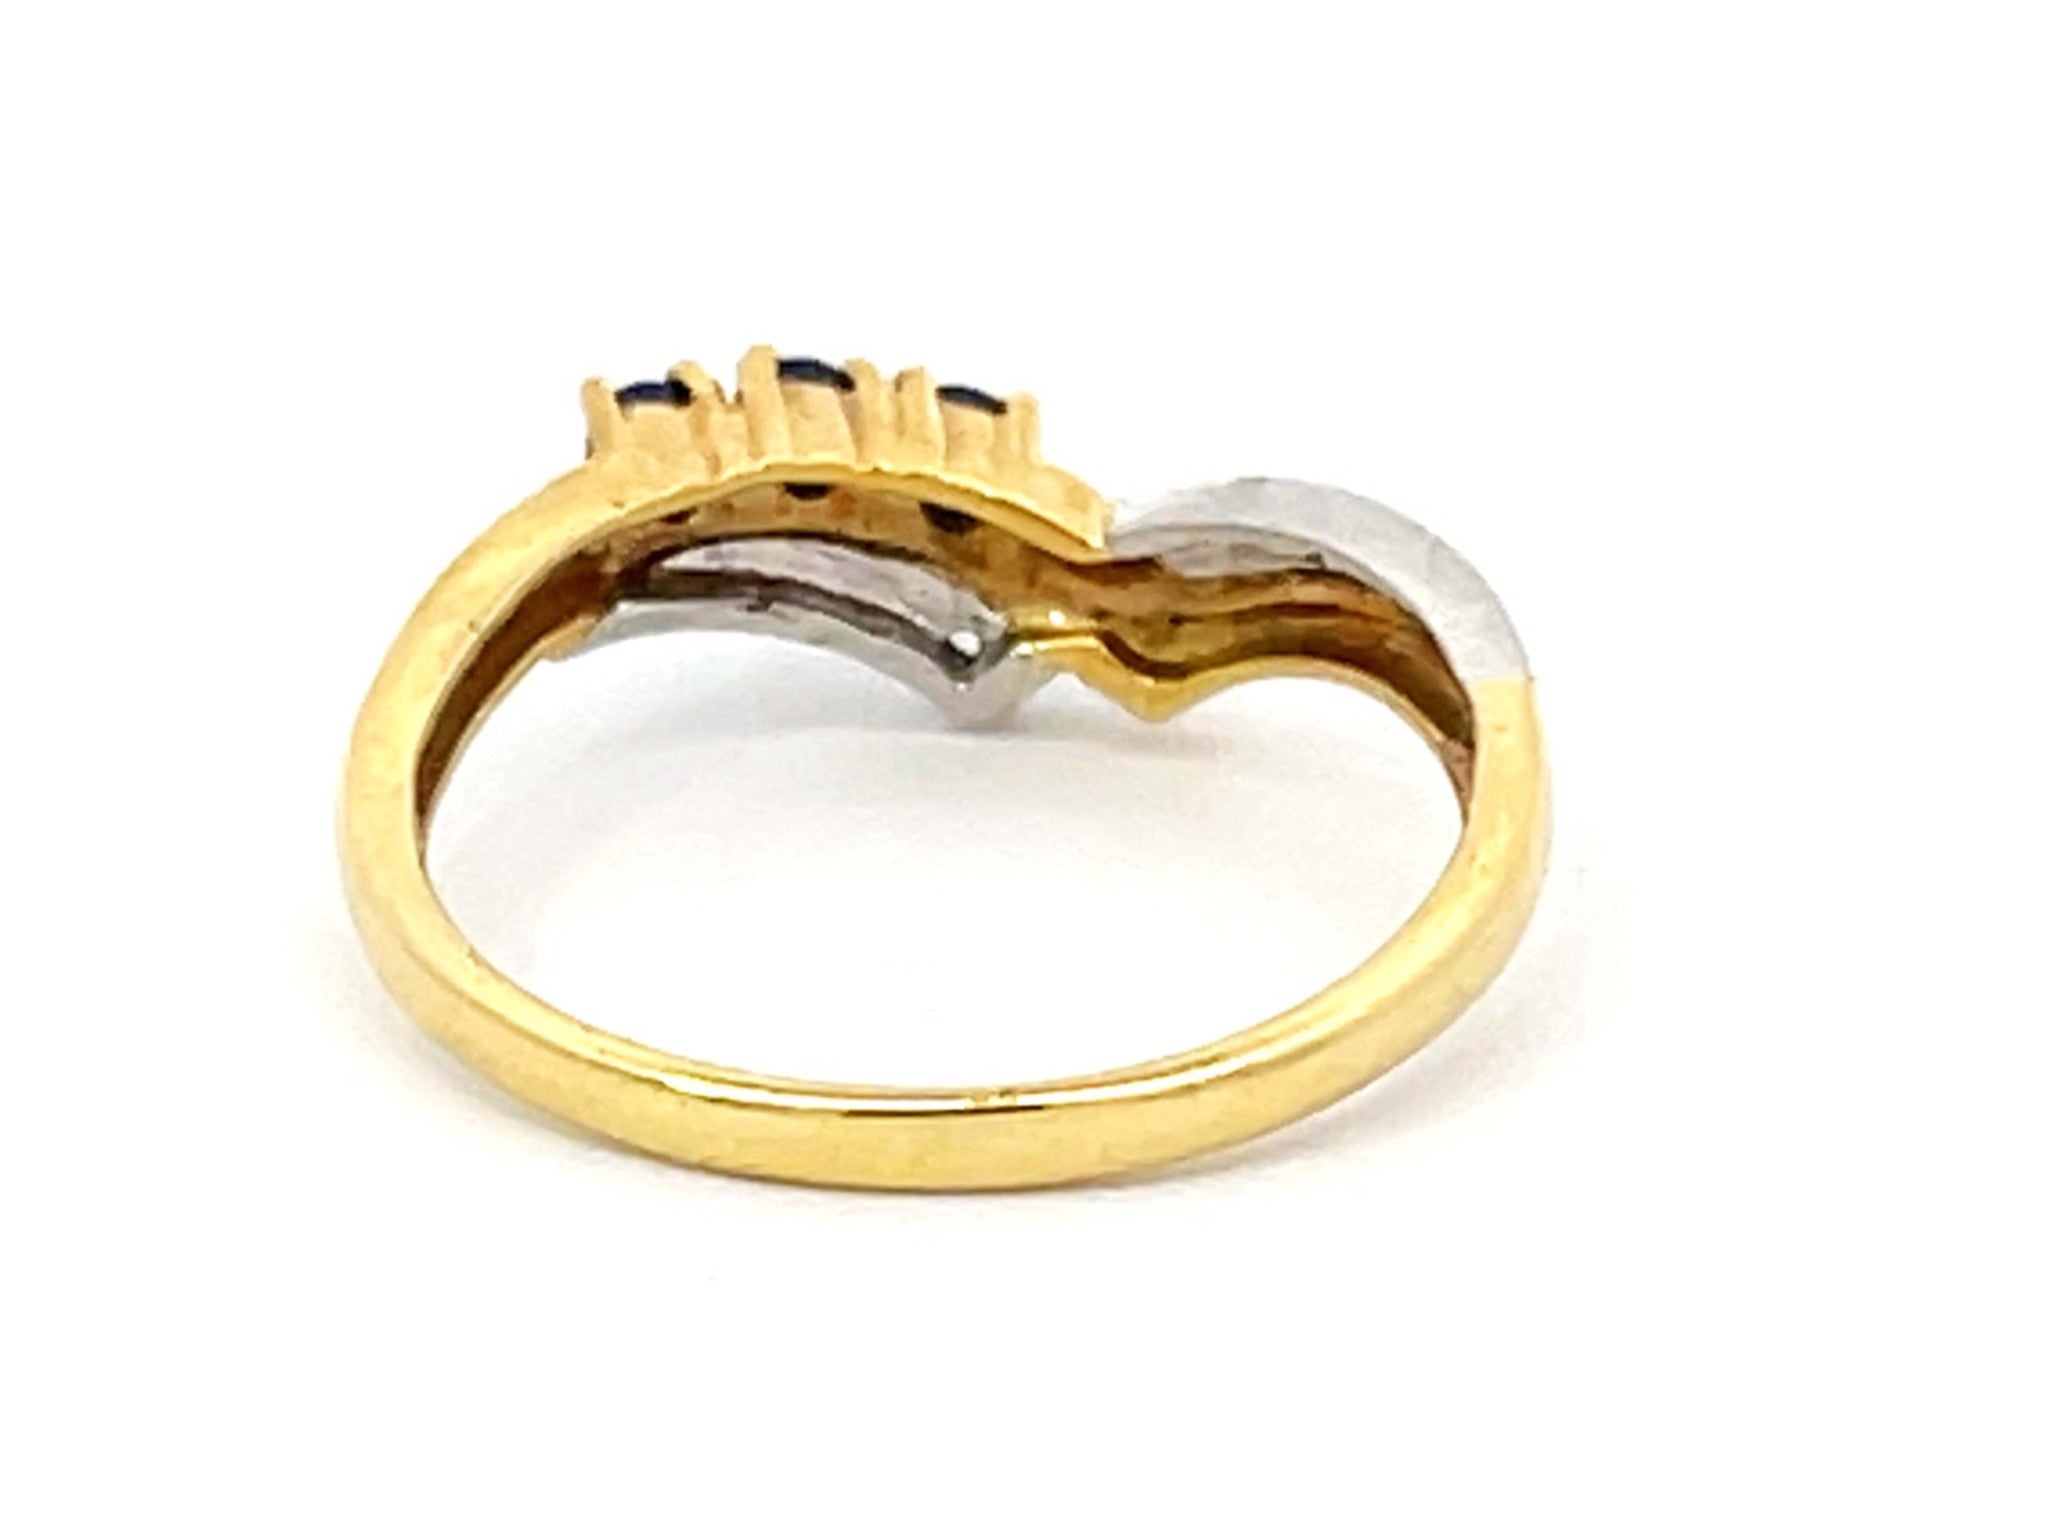 Two Toned V Shaped Sapphire and Diamond Ring in 18k Yellow Gold and Platinum